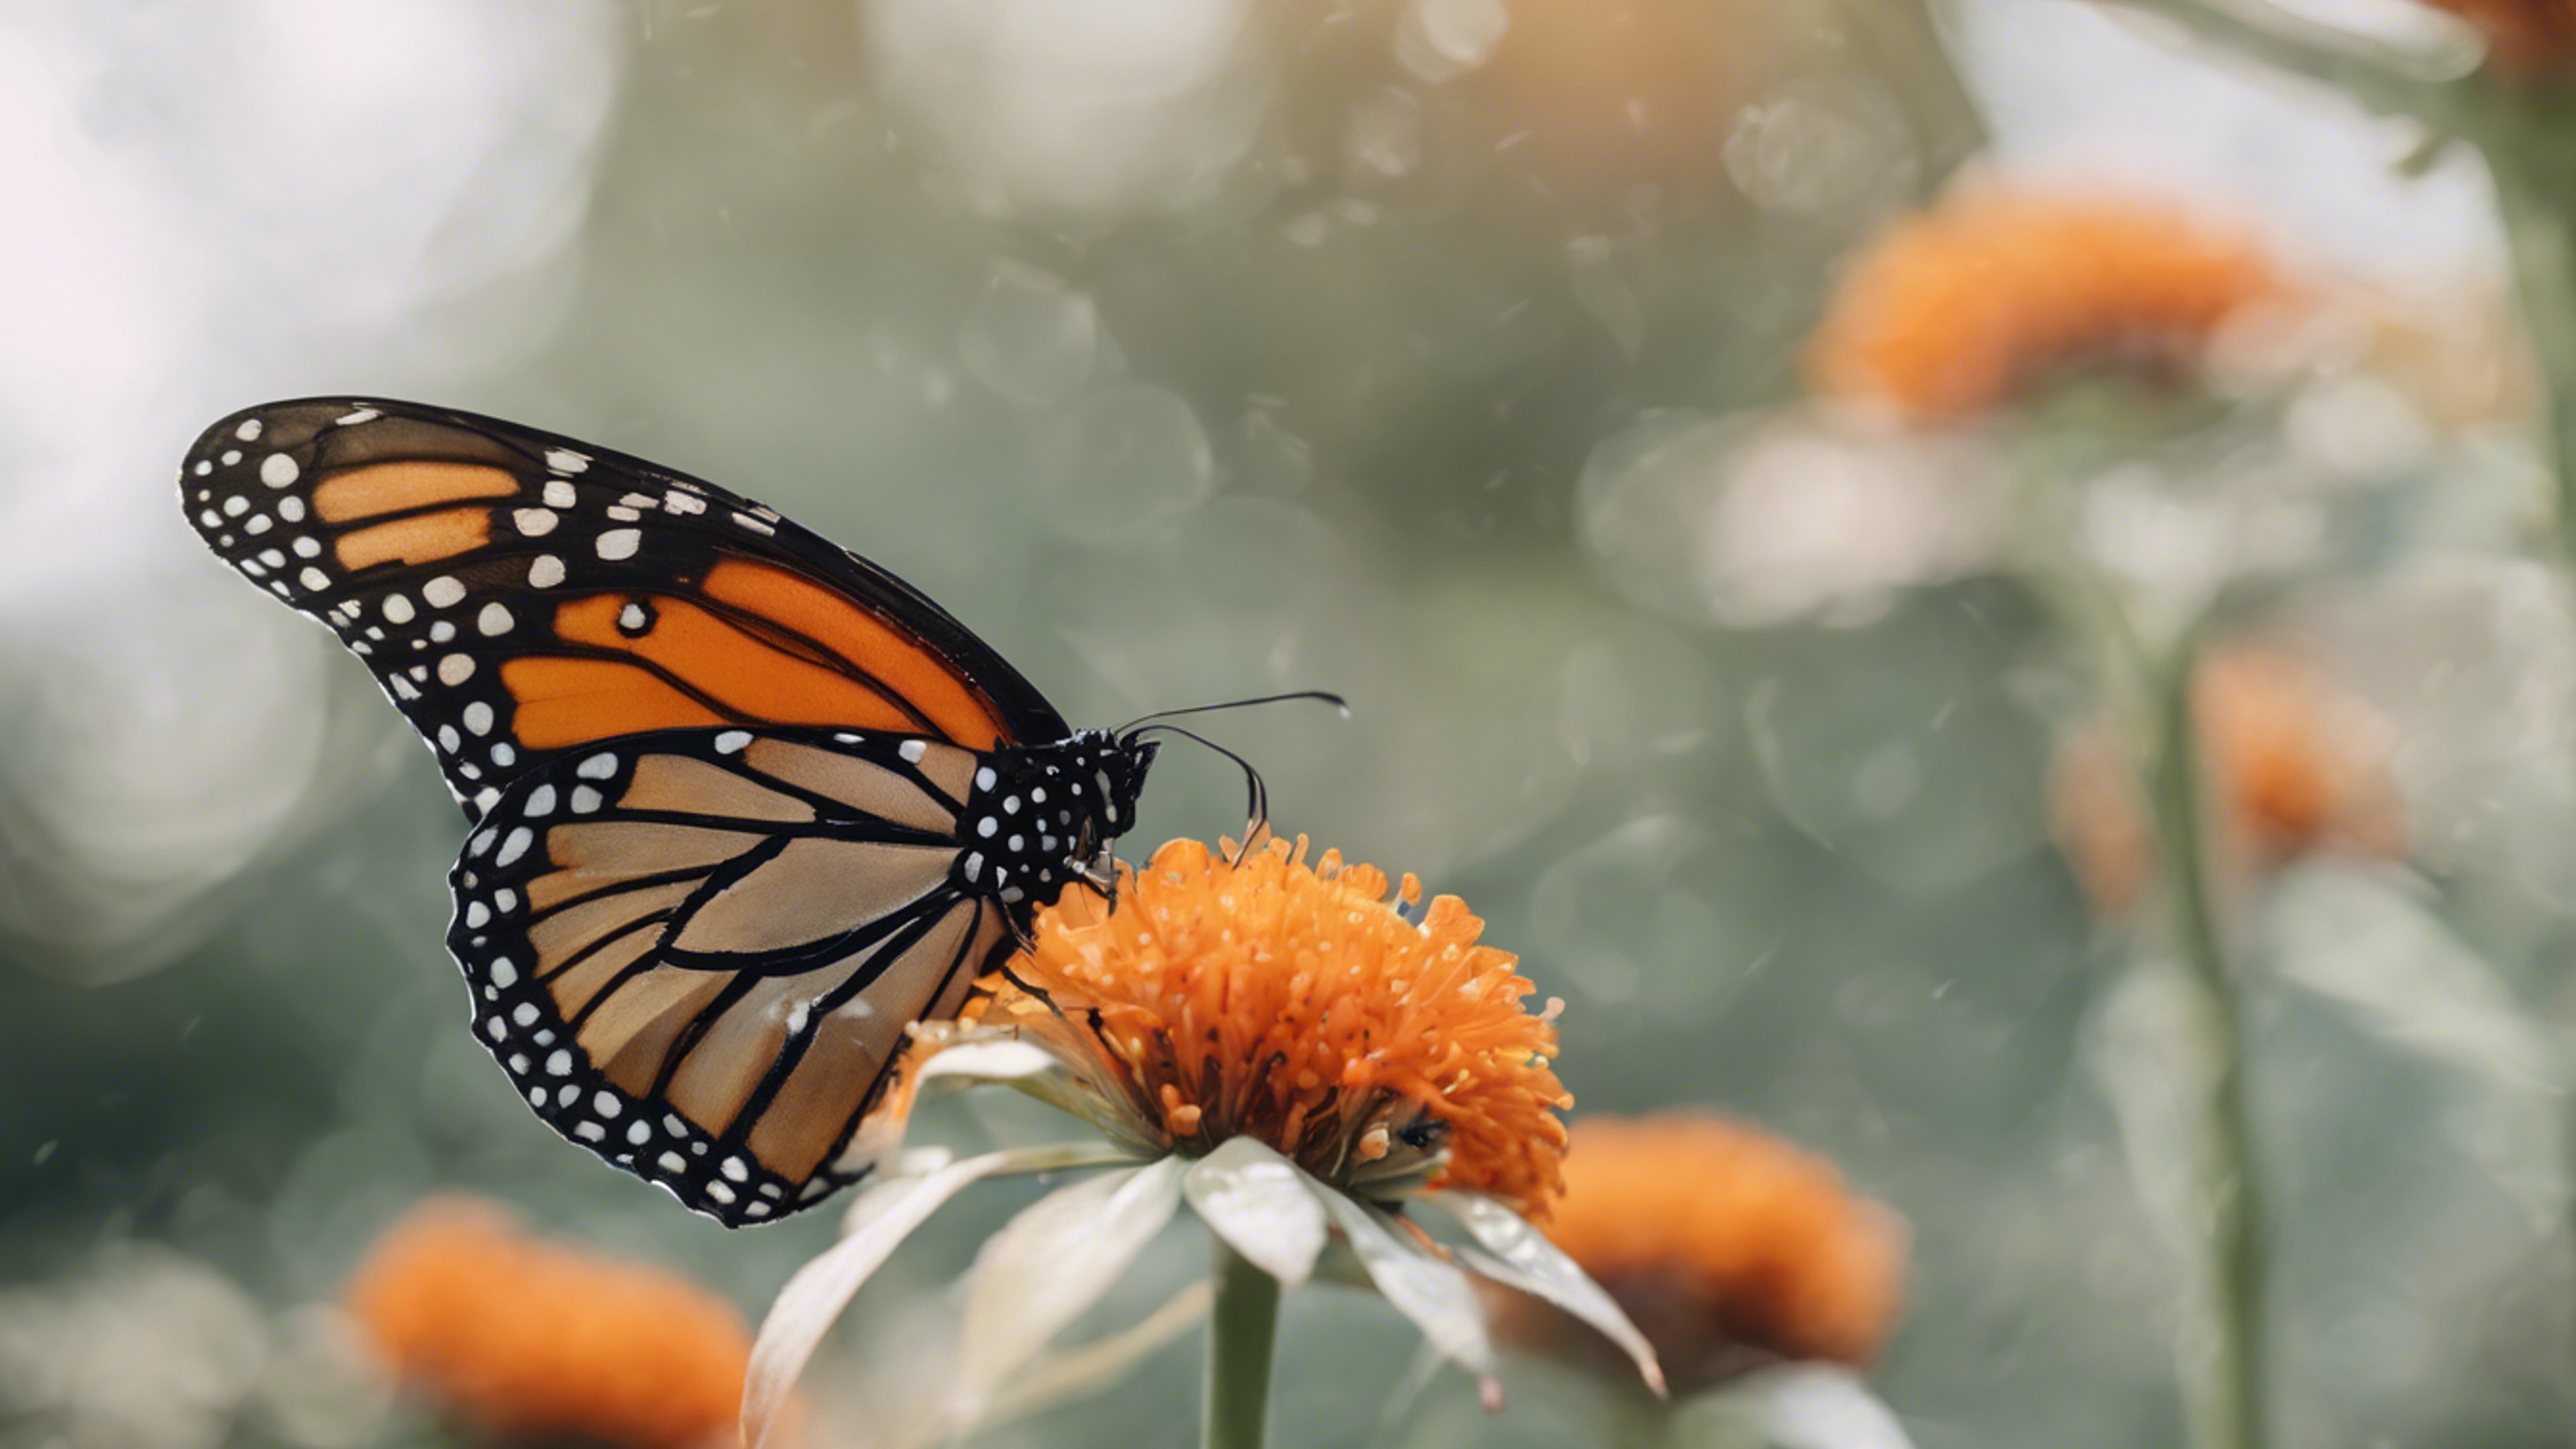 Macro close-up of a black-and-orange monarch butterfly perched on a flower.壁紙[56c2f855106d400187c7]